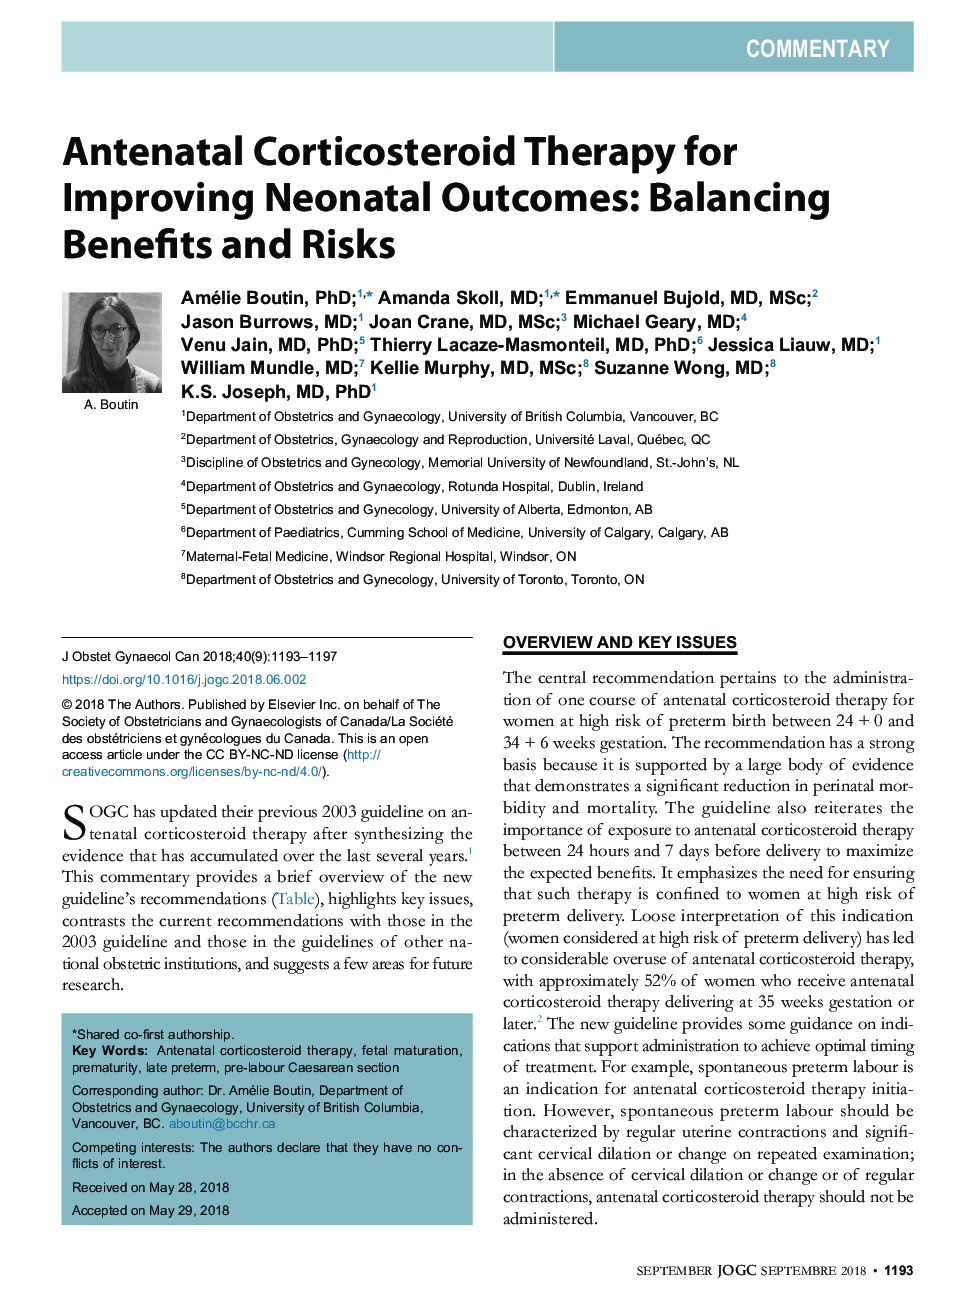 Antenatal Corticosteroid Therapy for Improving Neonatal Outcomes: Balancing Benefits and Risks